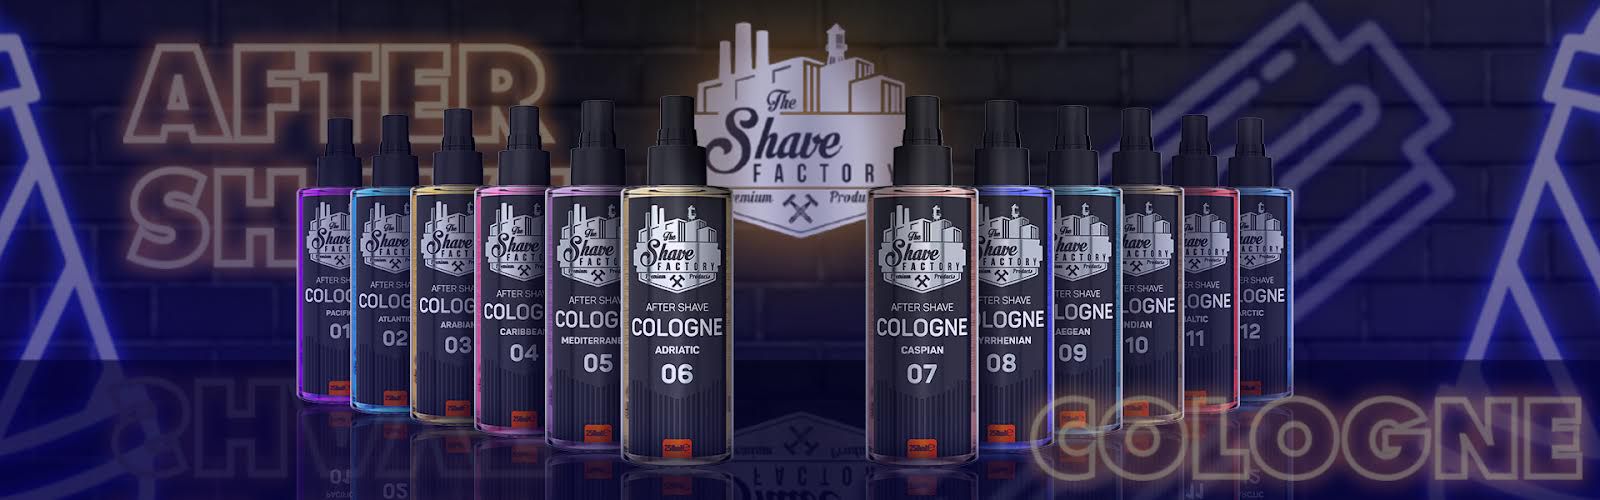 The Shave Factory After shave Cologne 